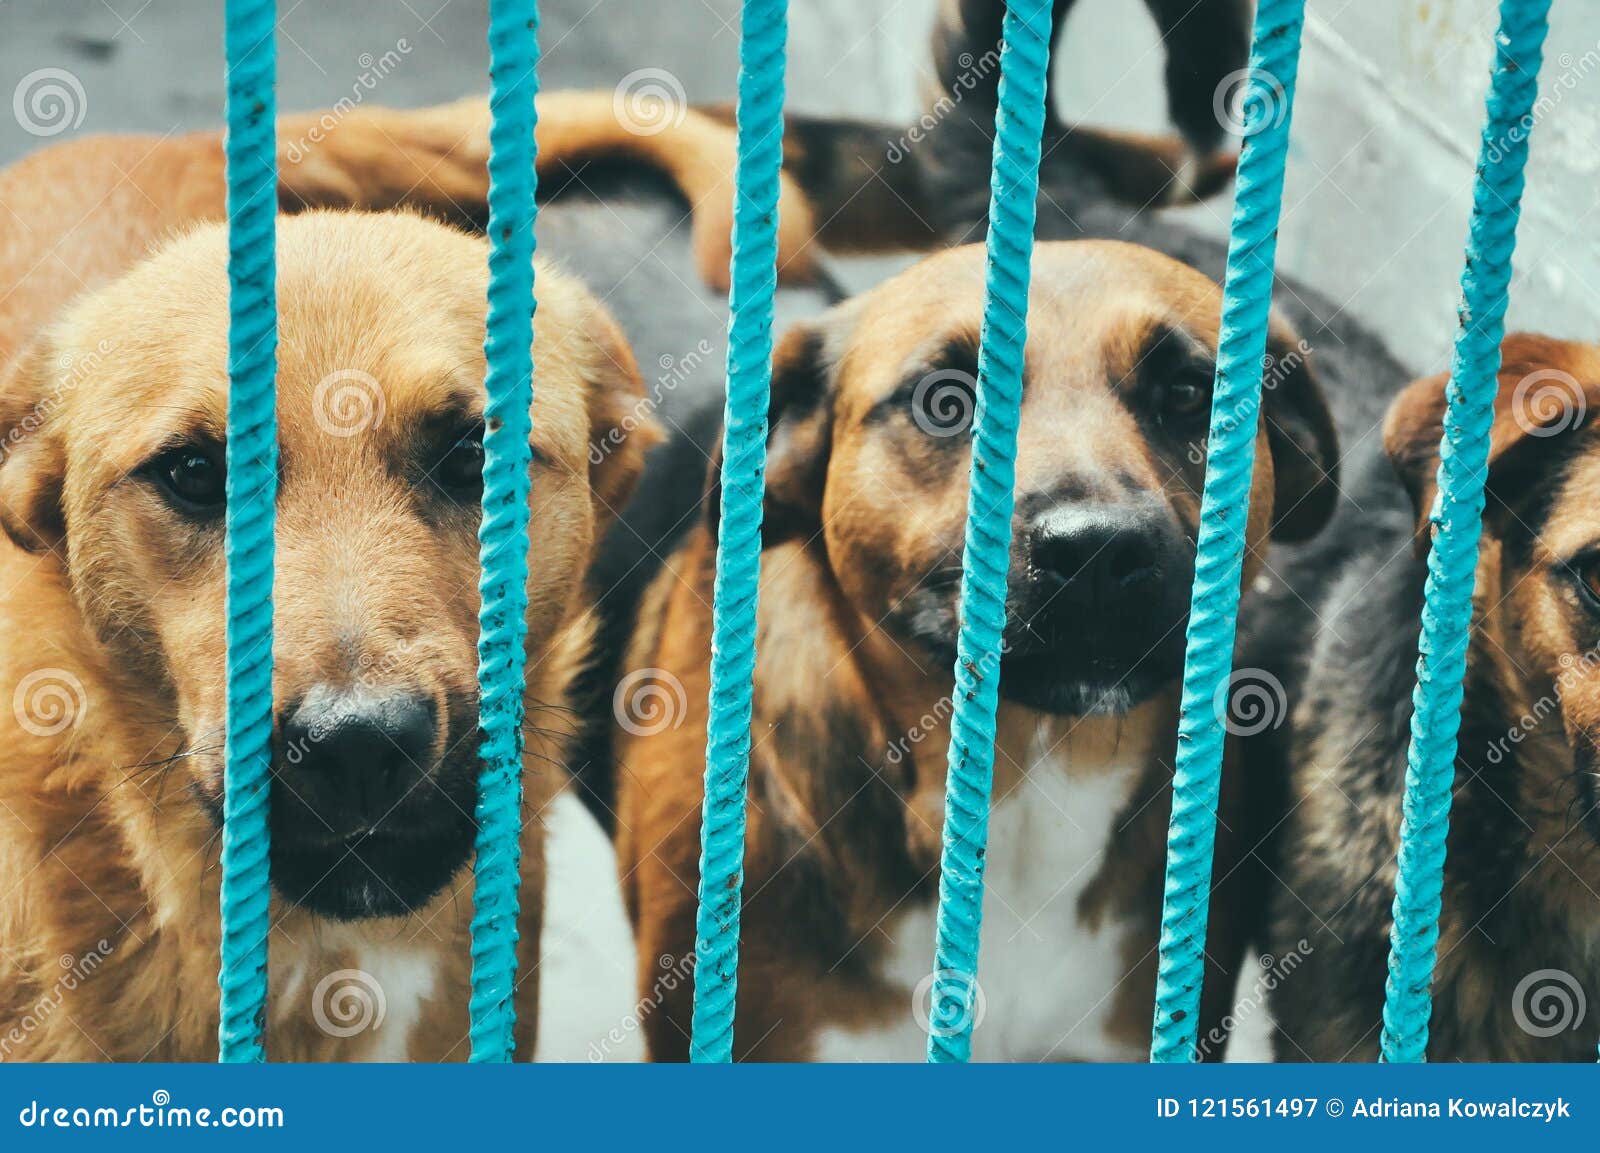 adoption pets sad animals concept cute dogs behind bars animal shelter waiting new owner sad dogs puppy animal 121561497